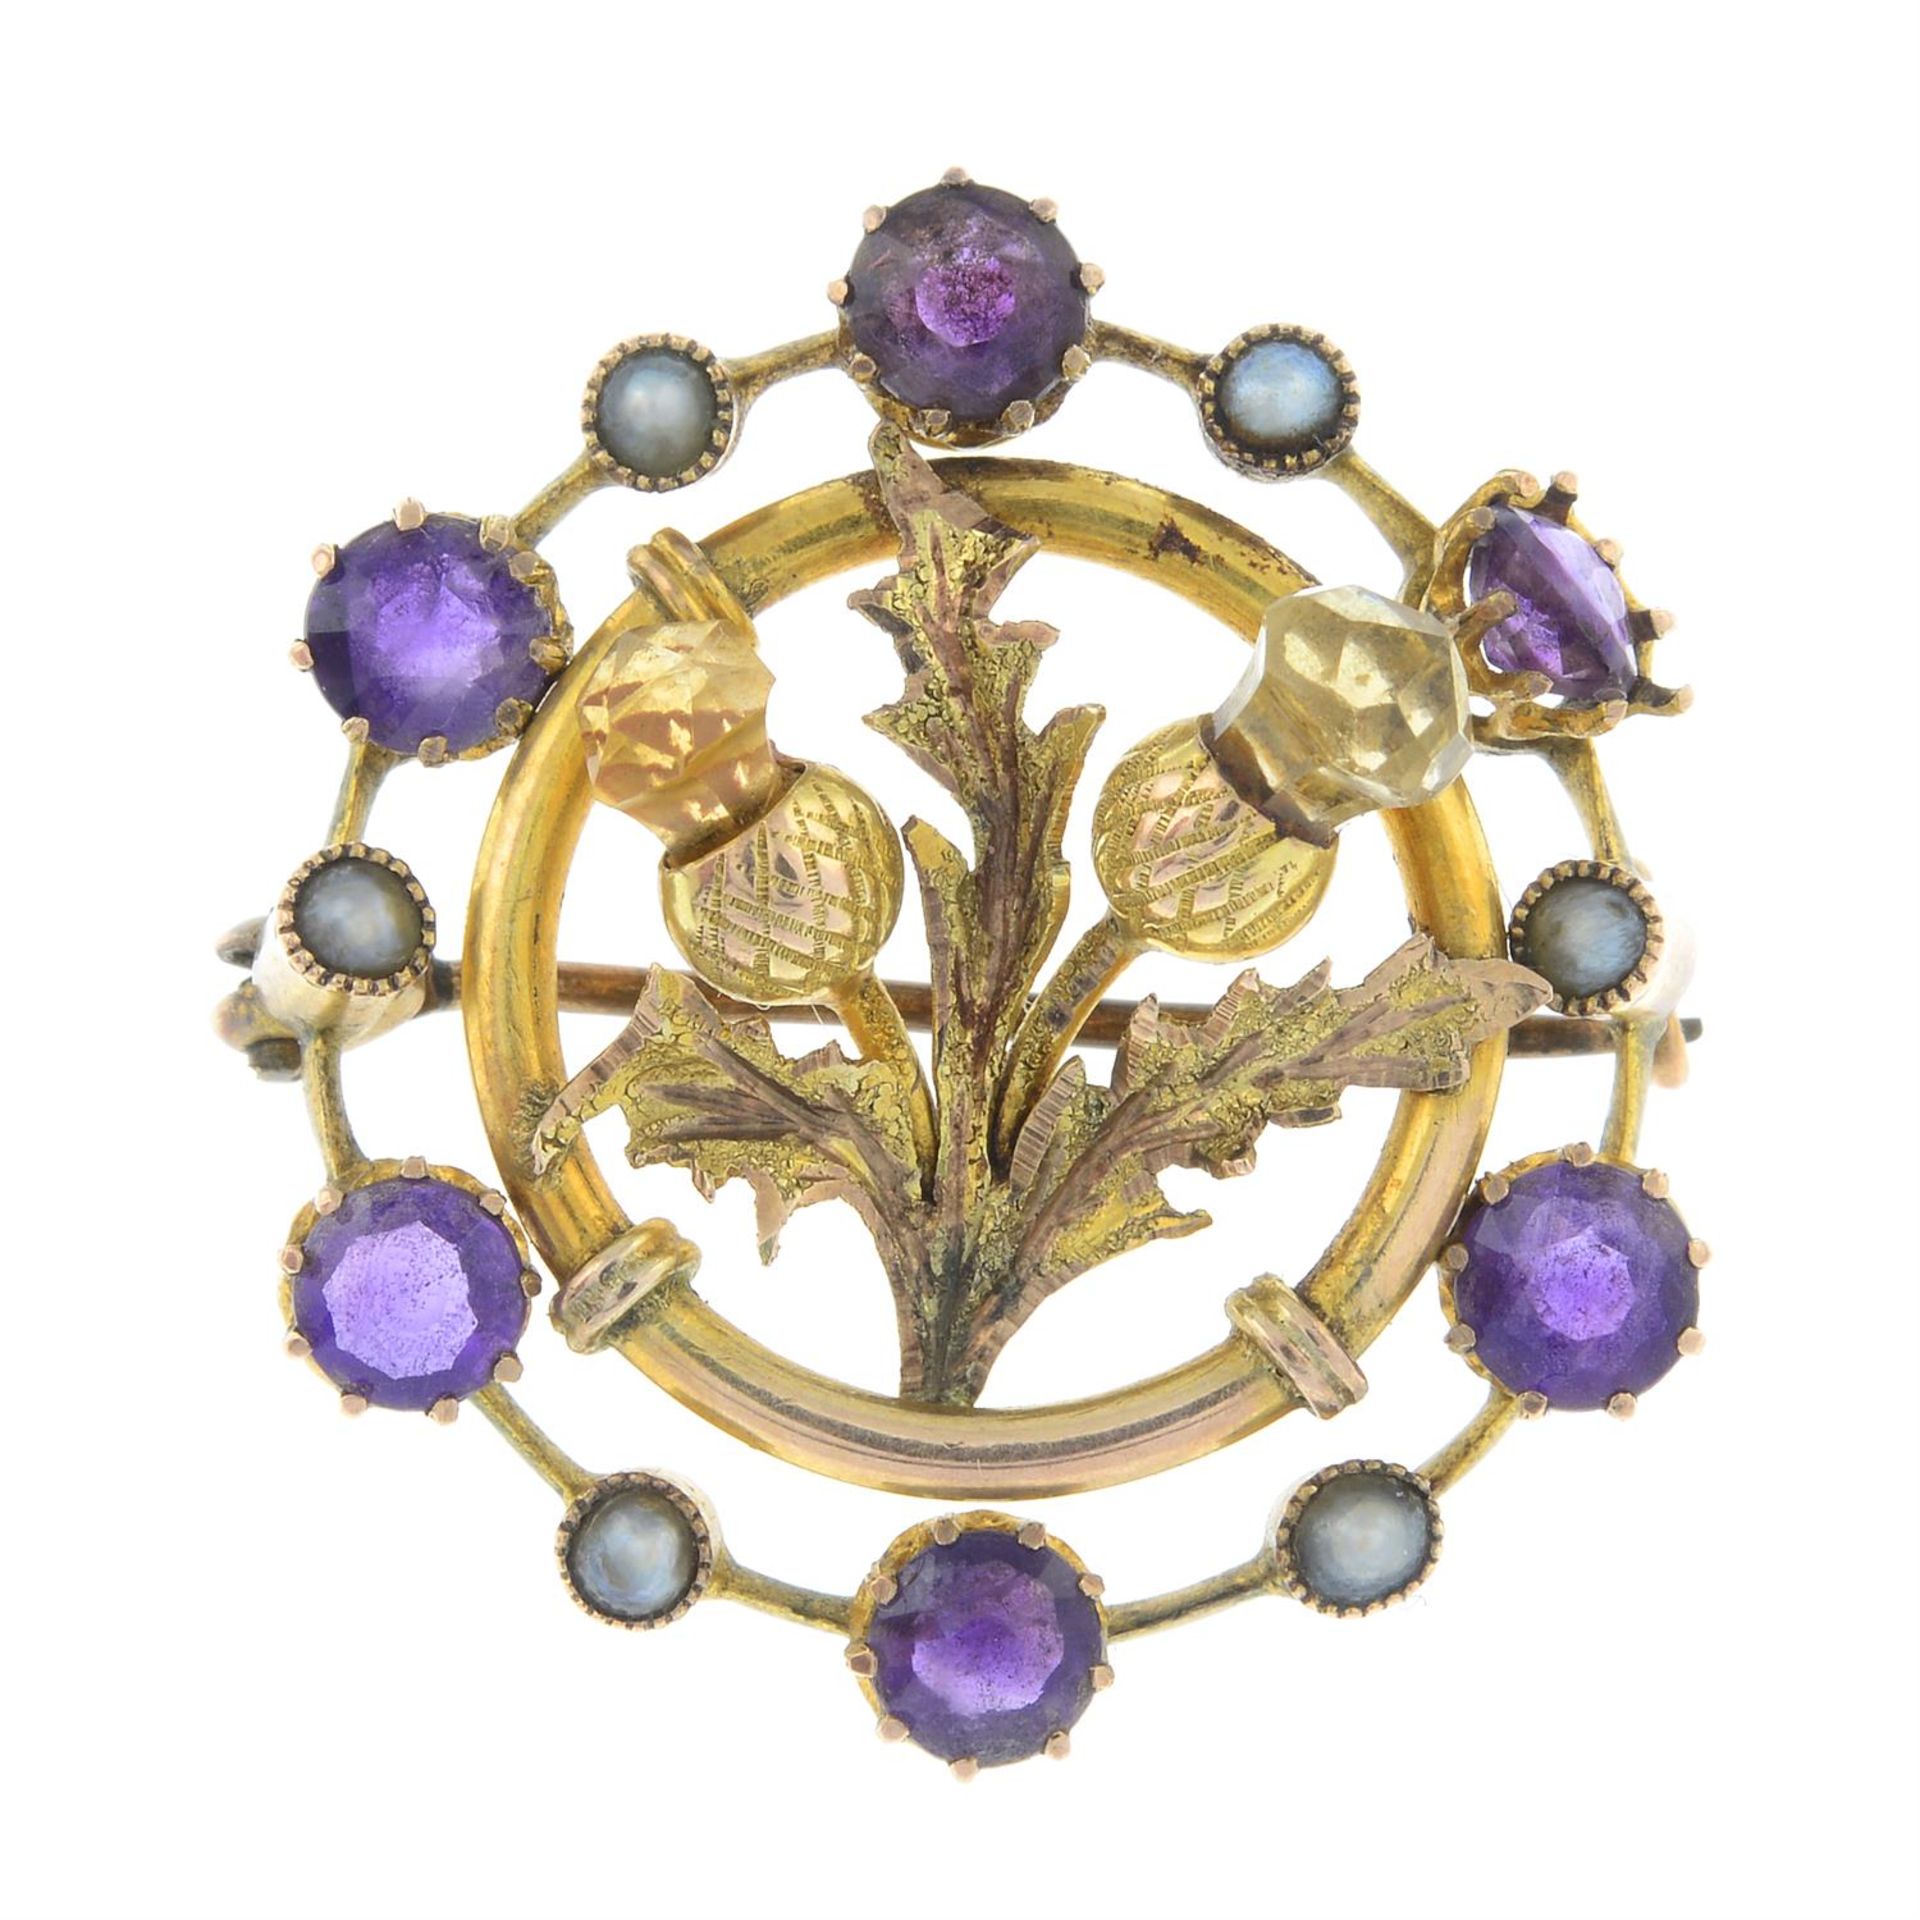 A 9ct gold citrine, amethyst and split pearl thistle brooch.